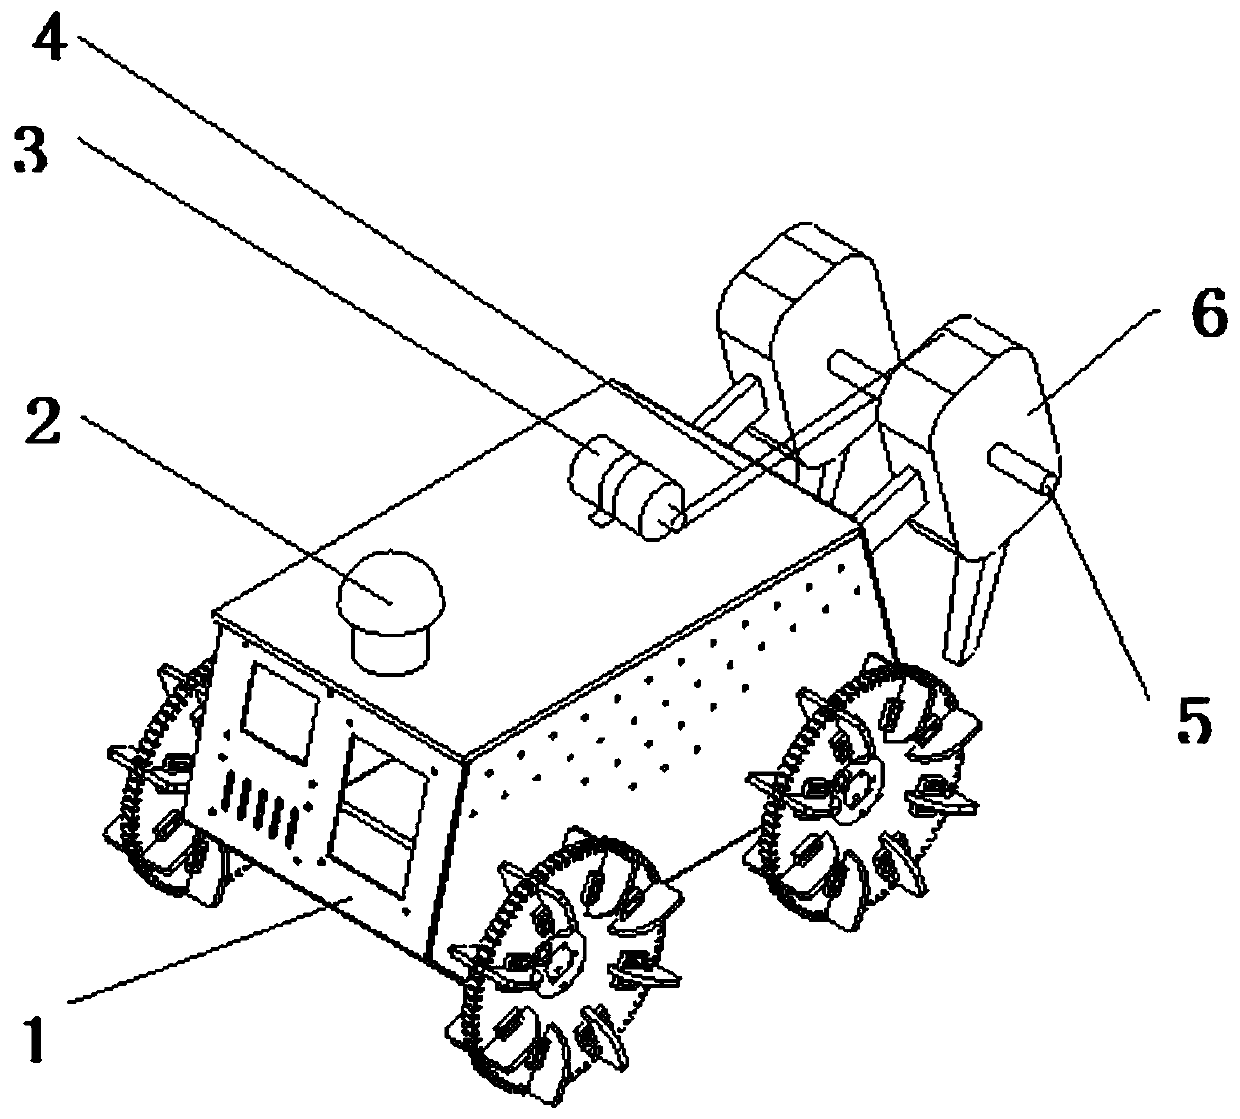 Rice direct seeding device and method based on intelligent robot